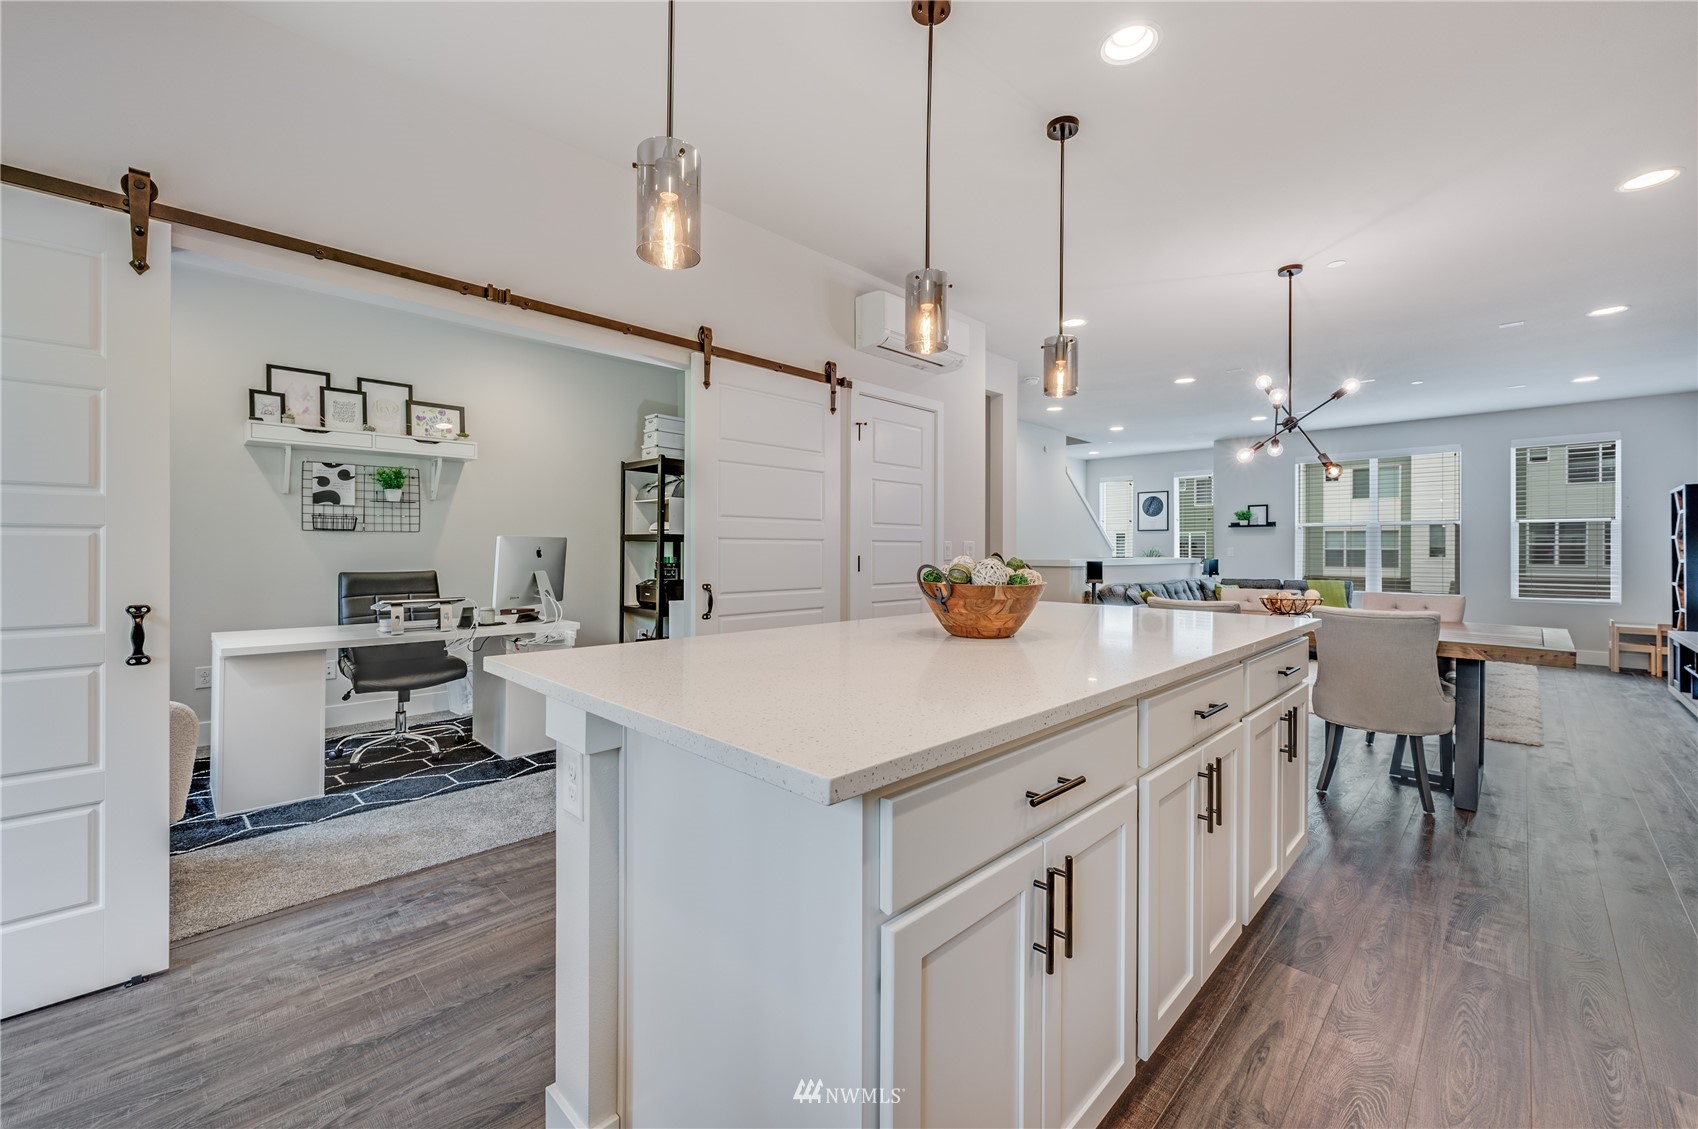 a kitchen with kitchen island a wooden floor and white appliances